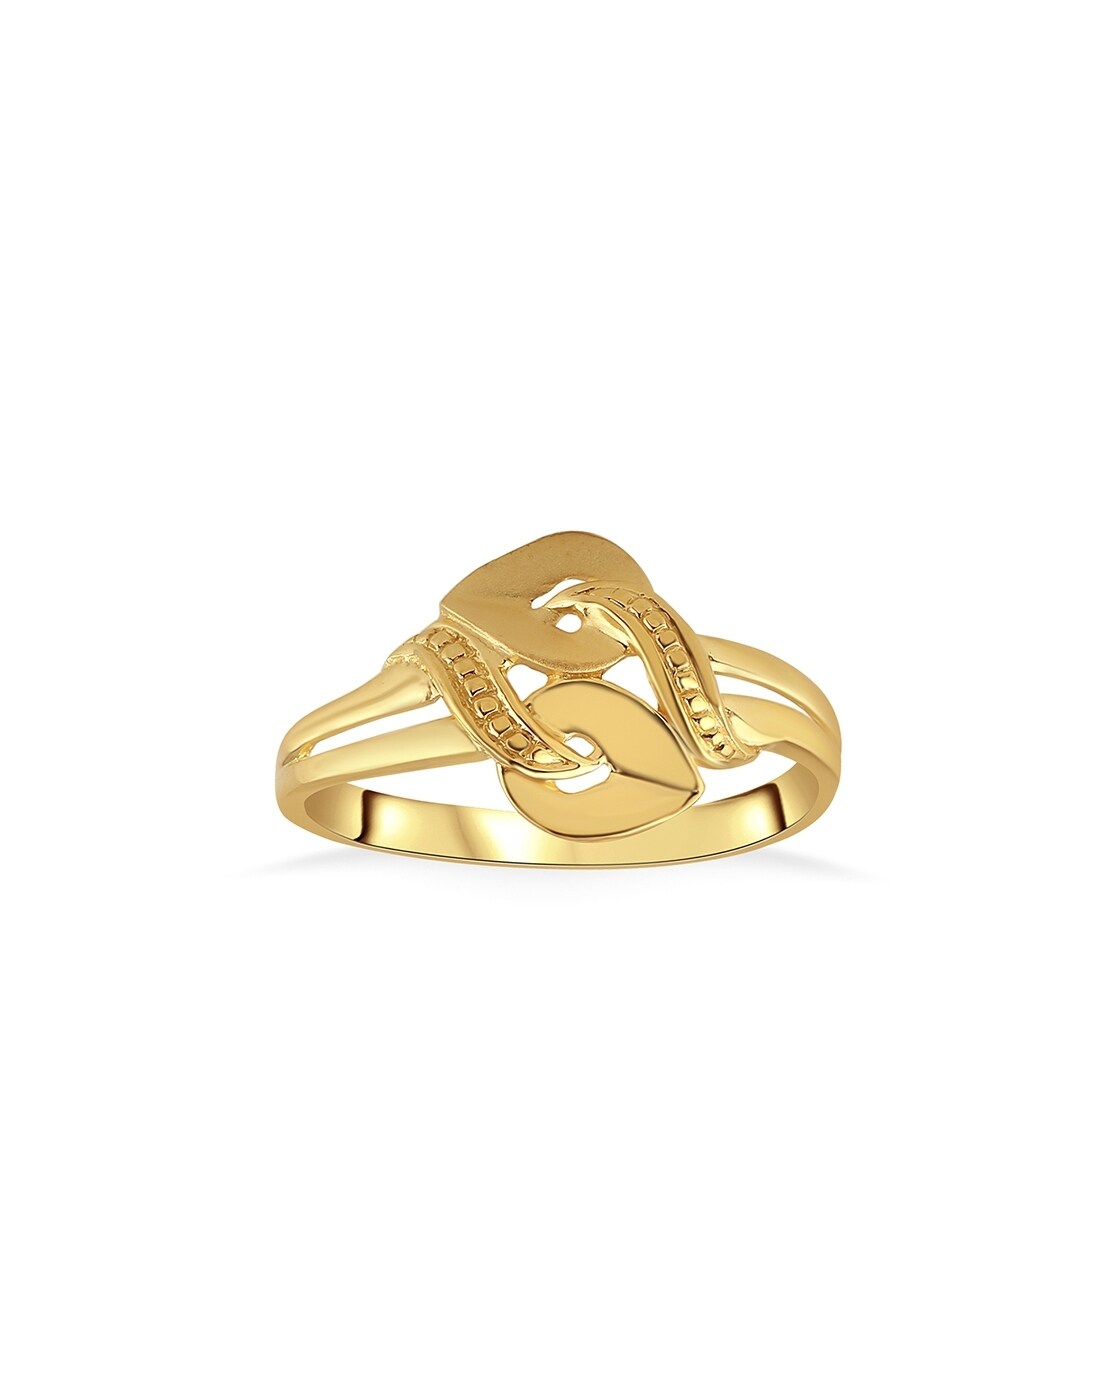 Light weight gold Ladies Ring Designs Price - 4670 रु || Trendy gold ladies  ring Collection || - YouTube